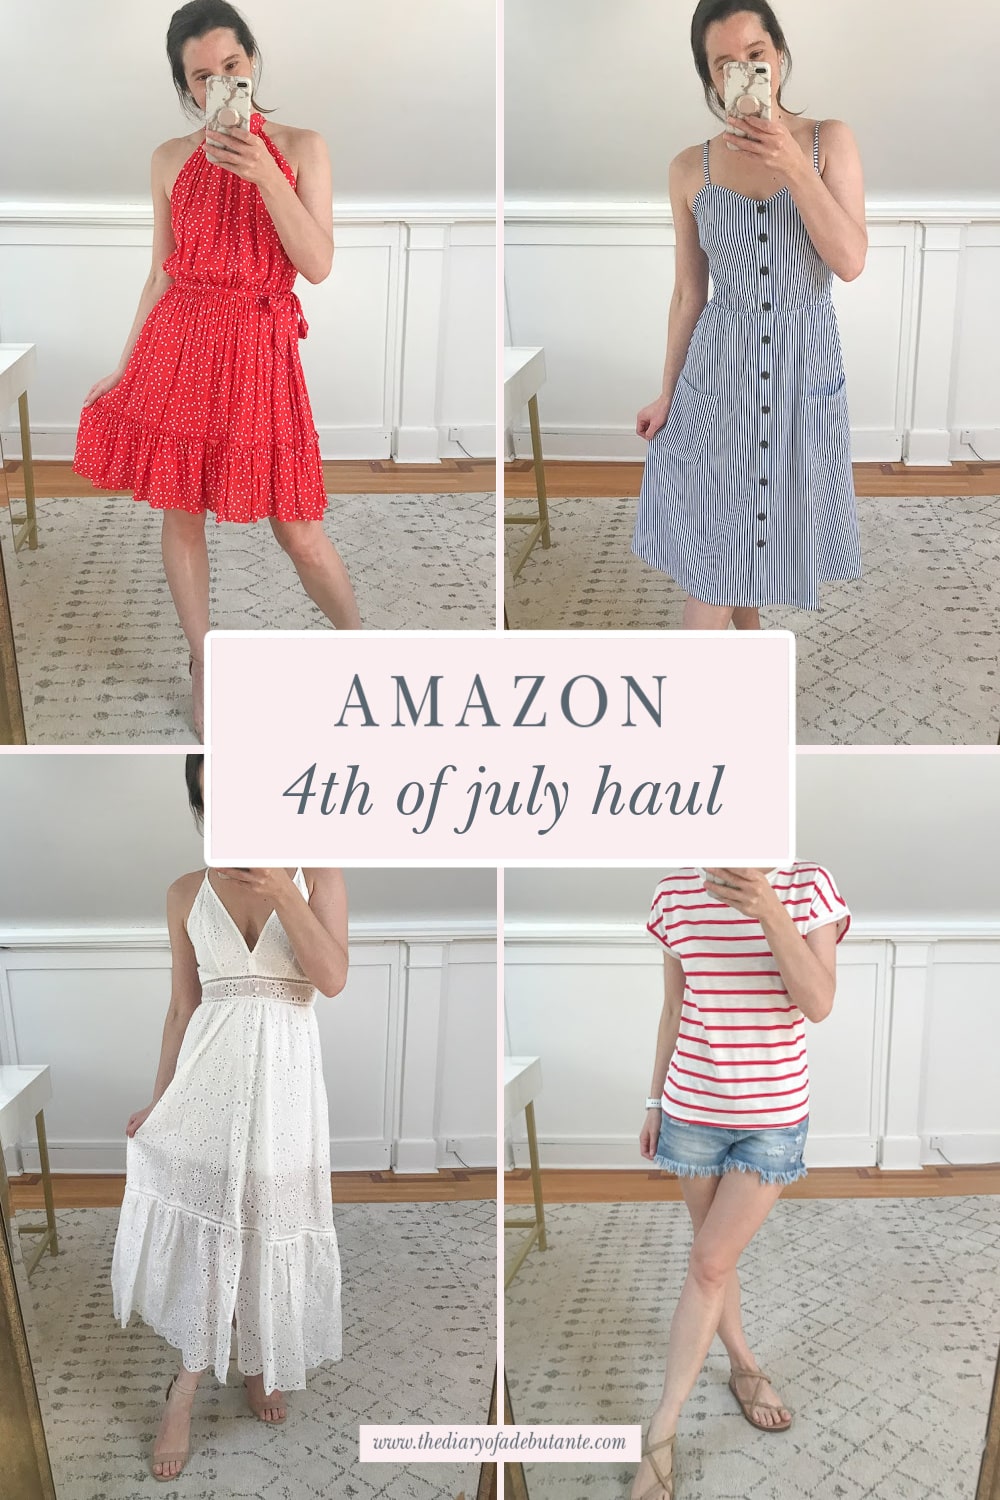 4th of July try on haul from affordable fashion blogger Stephanie Ziajka on Diary of a Debutante